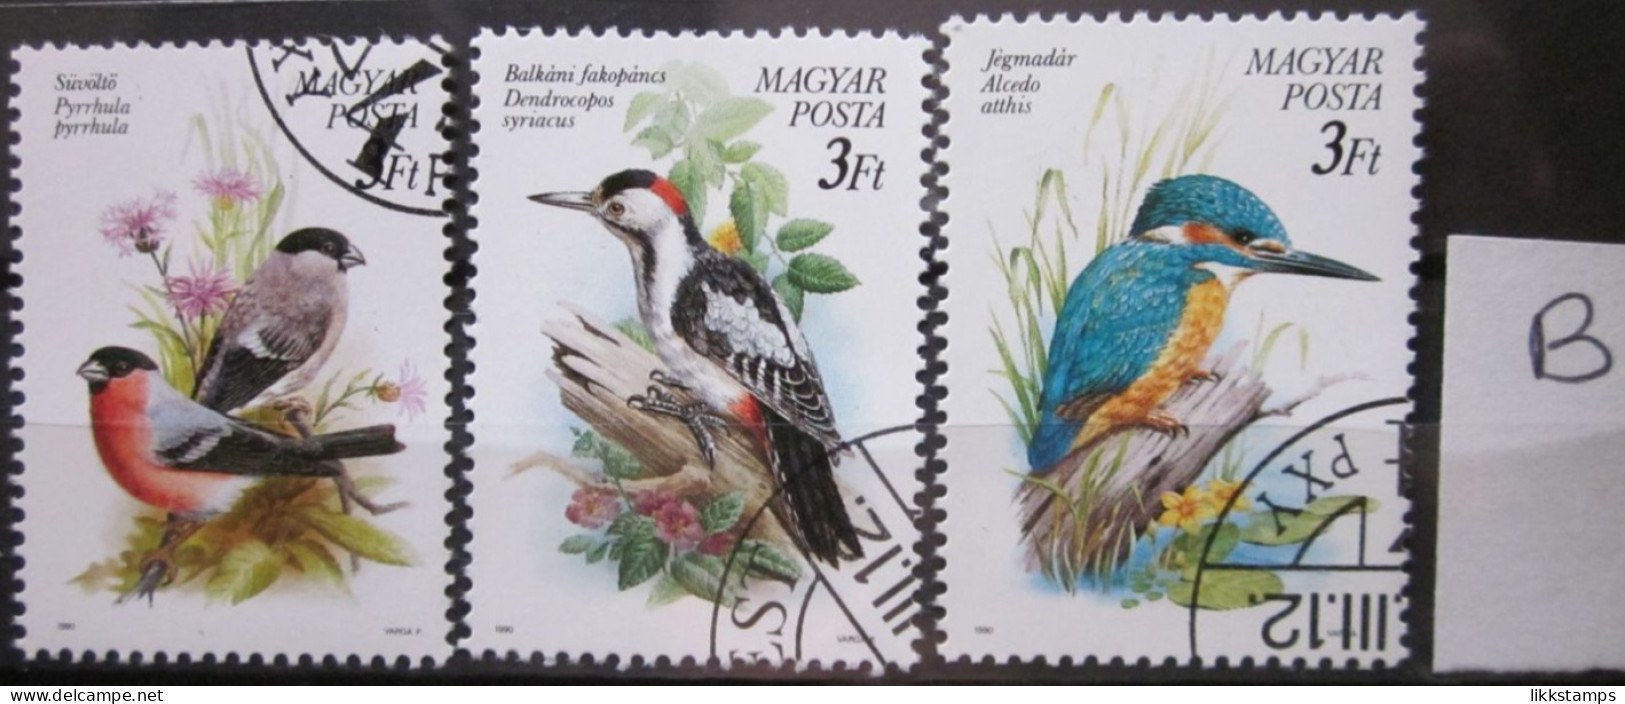 HUNGARY ~ 1990 ~ S.G. NUMBERS 3960 - 3962, ~ 'LOT B' ~ BIRDS. ~ VFU #02795 - Used Stamps